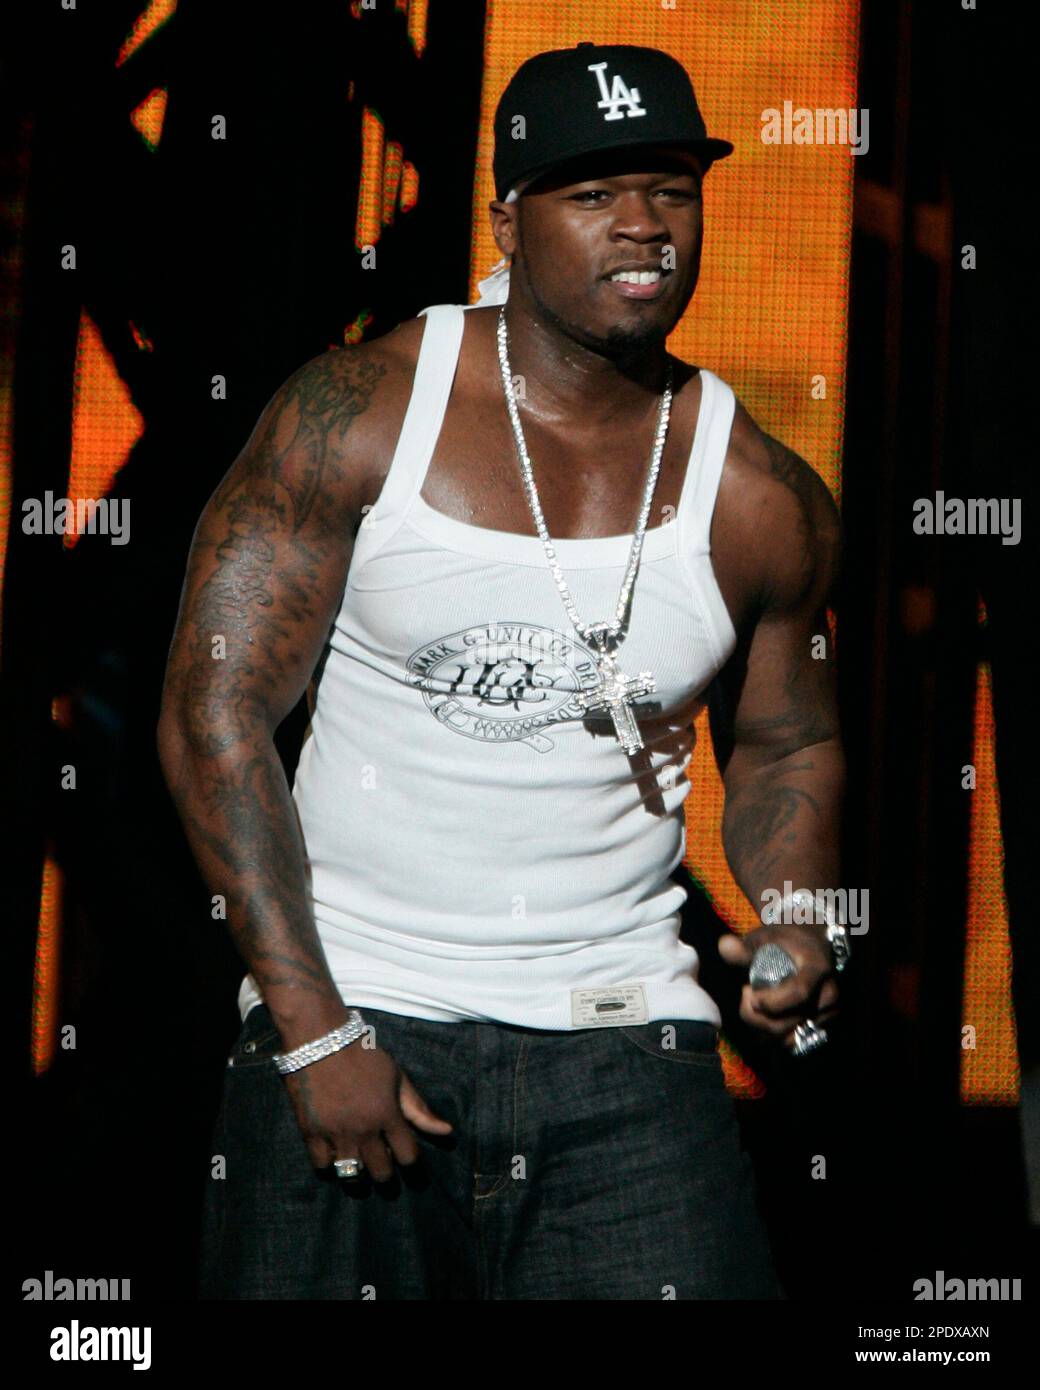 Rapper 50 Cent, formerly known as Curtis Jackson, performs with G-Unit at  the Tweeter Center in Mansfield, Mass., Monday, August 22, 2005, as part of  his Massacre Tour 2005 to promote his